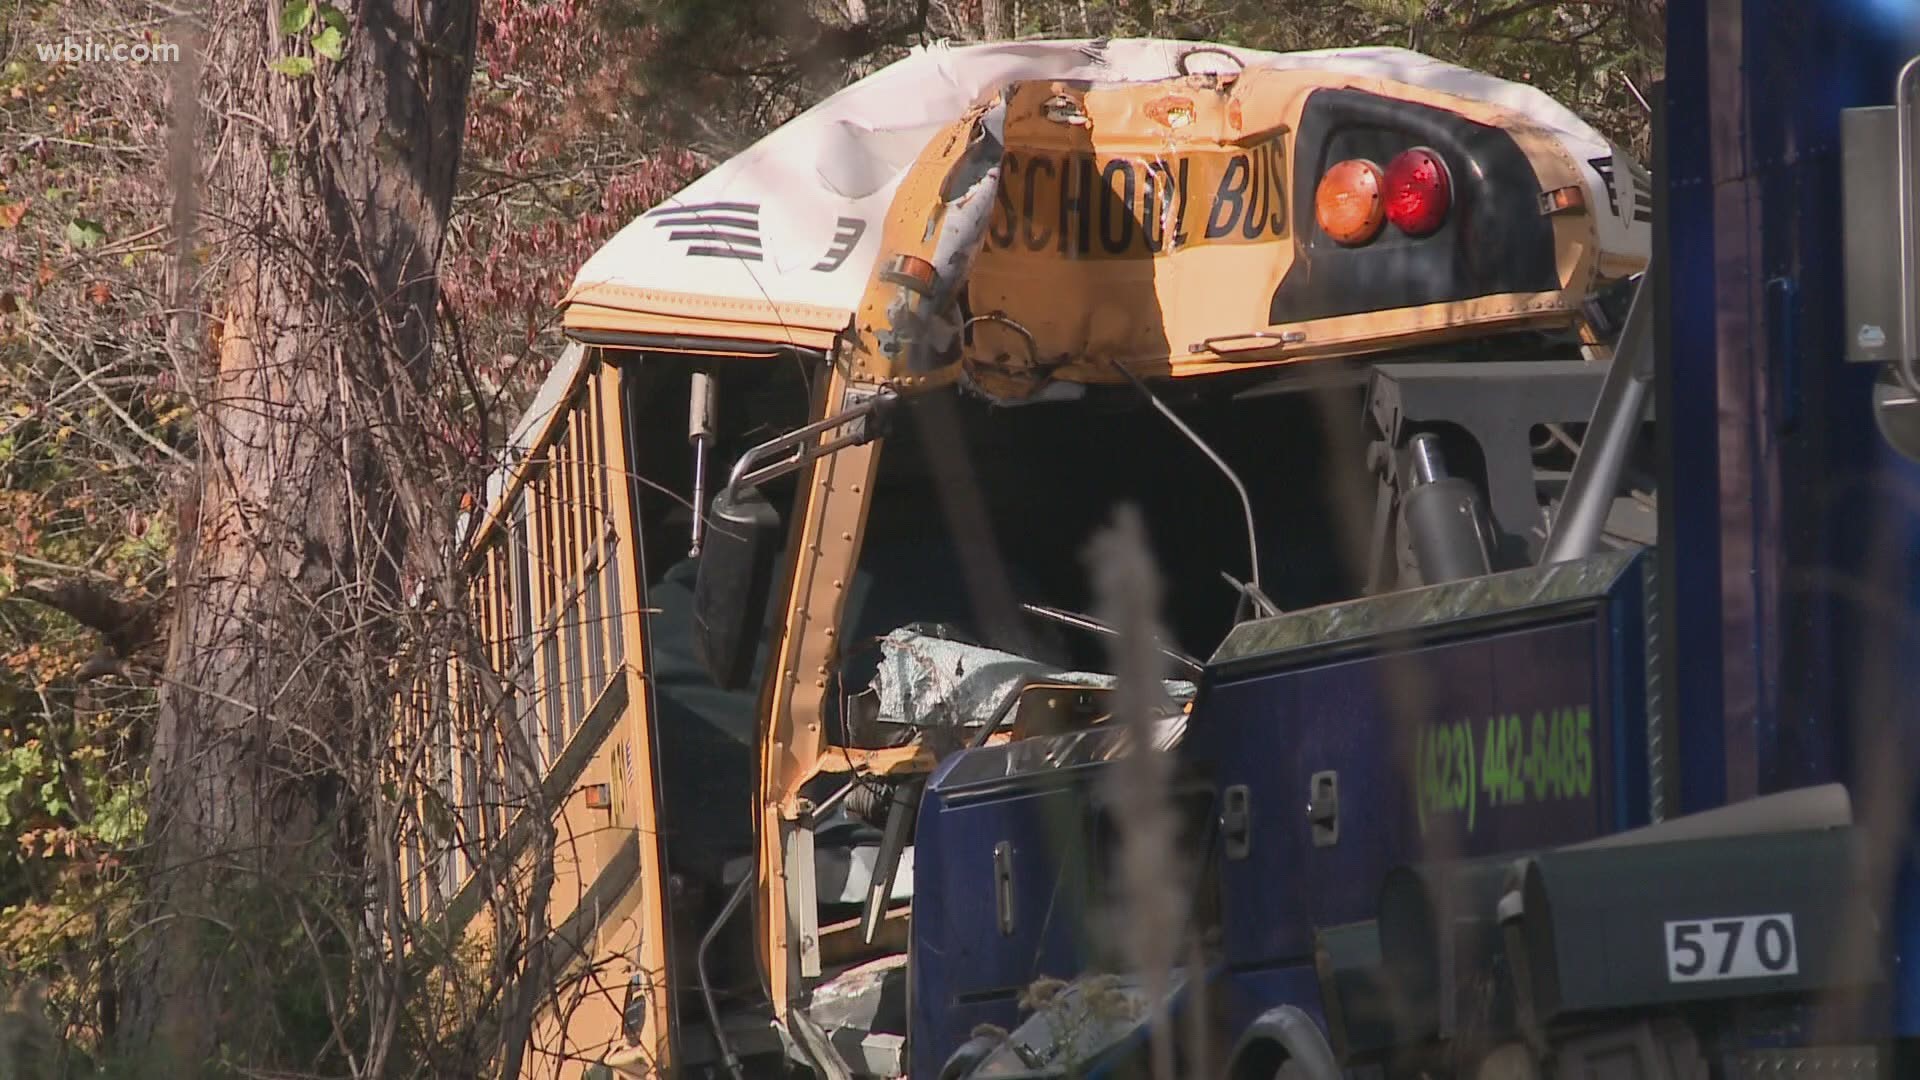 A THP report says the Monroe County bus that crashed Thursday ran off the road and hit a tree. 23 children were on board.